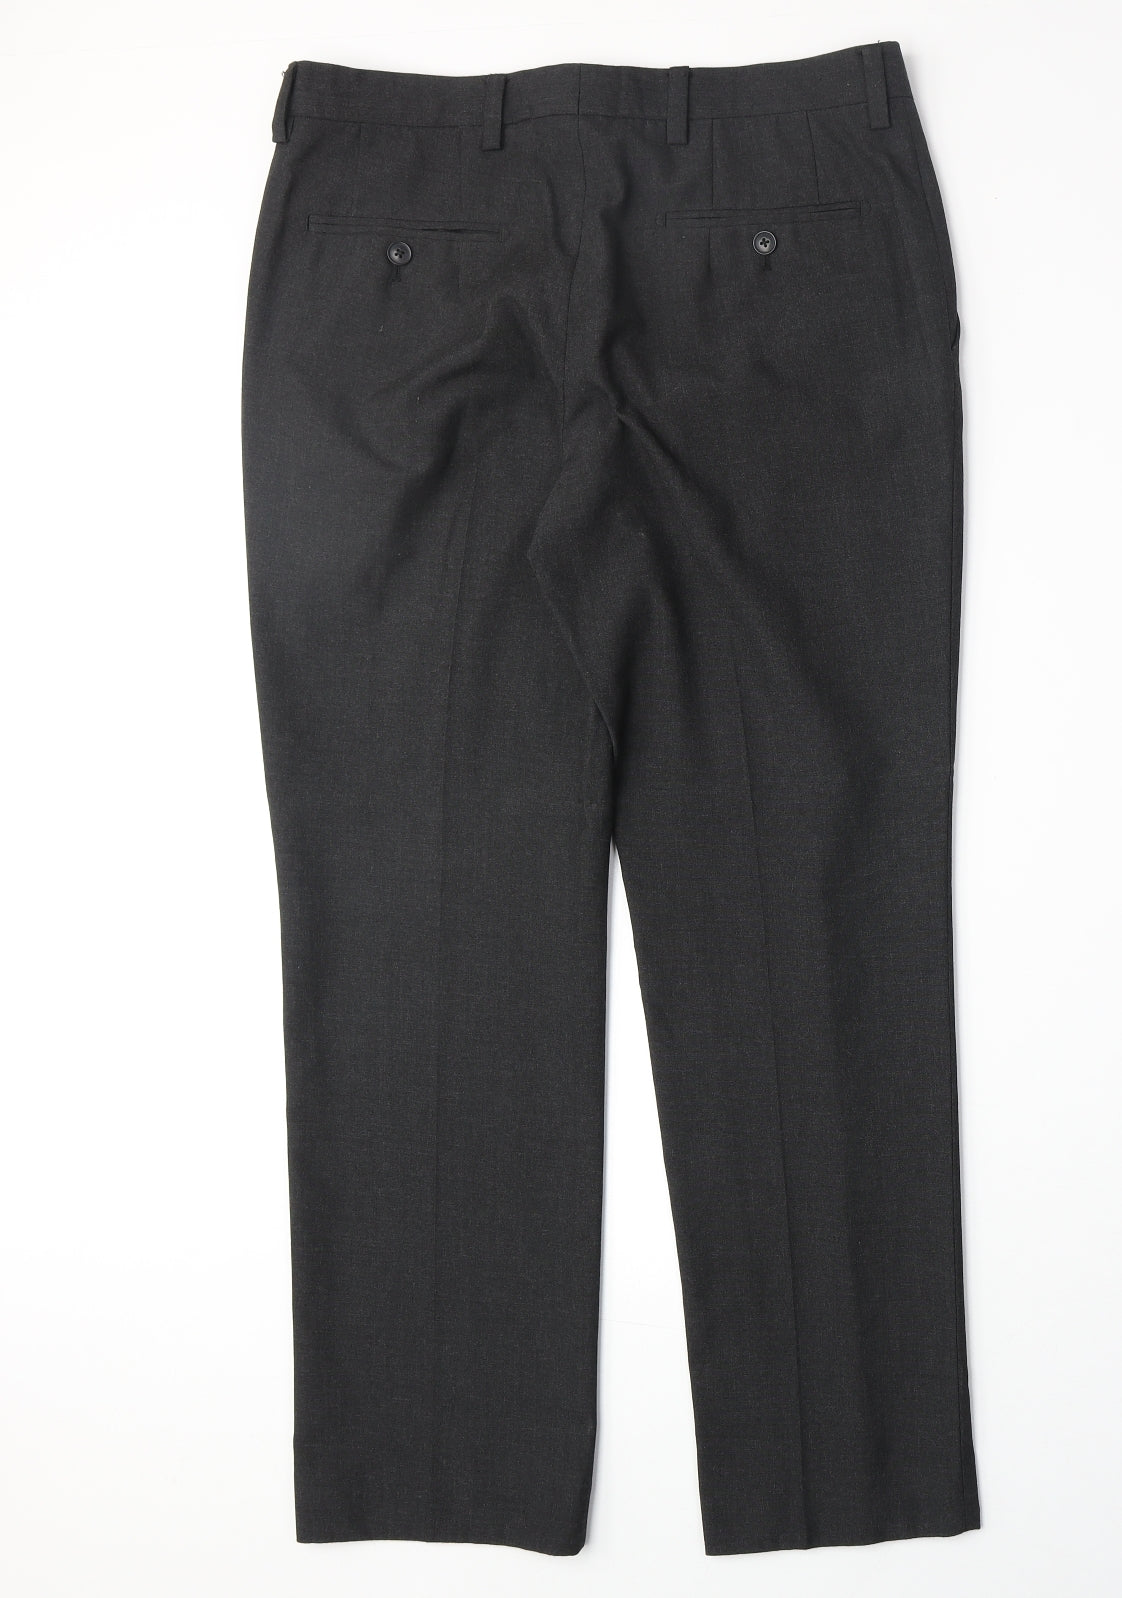 NEXT Mens Grey Polyester Dress Pants Trousers Size 32 in Regular Zip